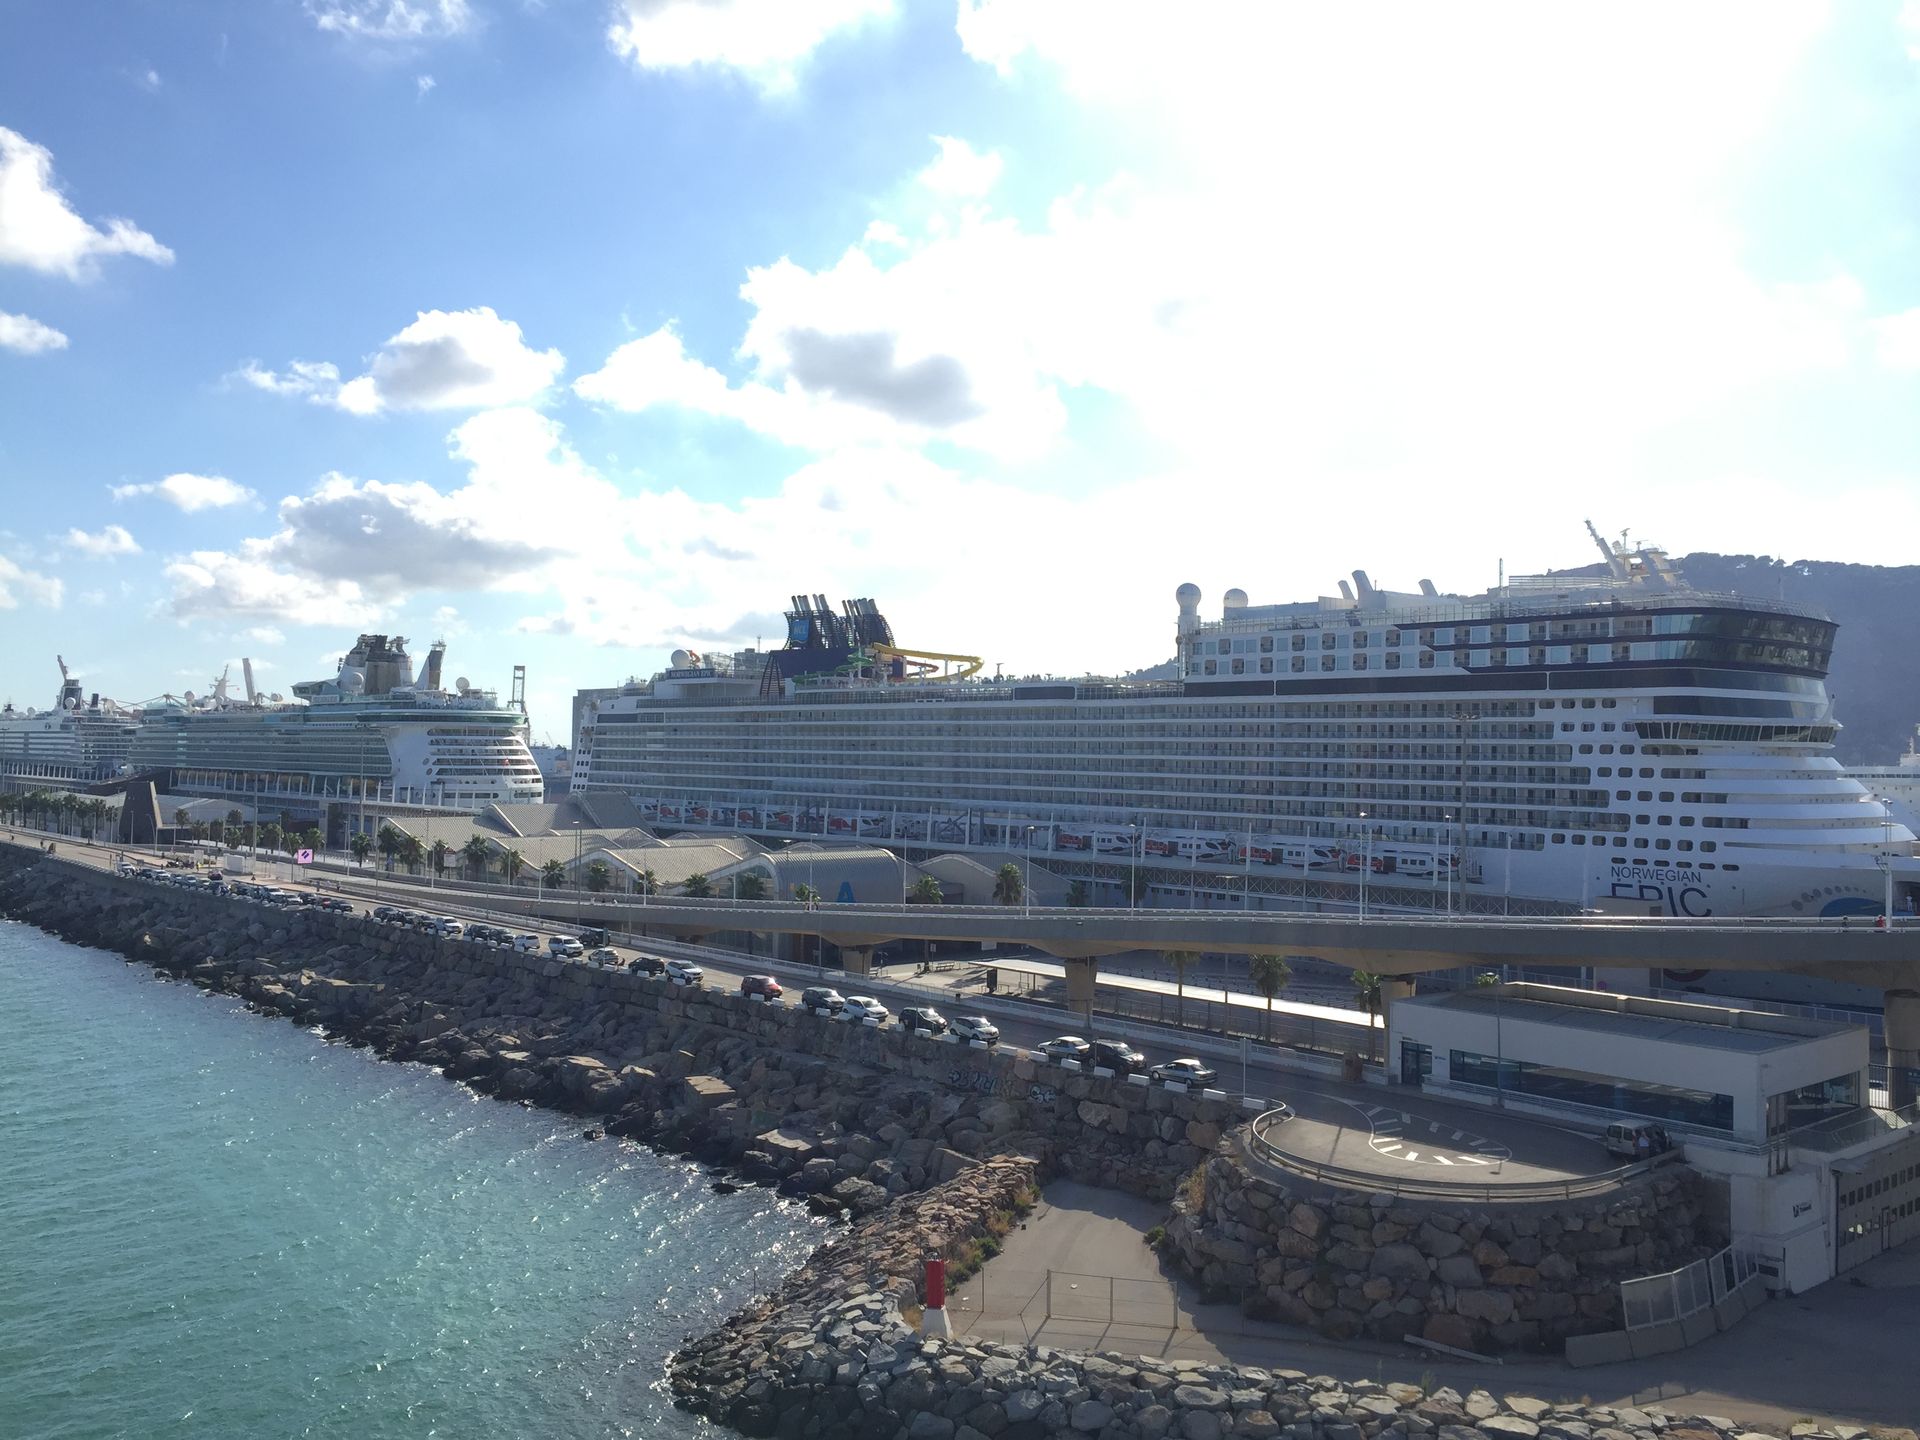 a large cruise ship is docked in Barcelona port